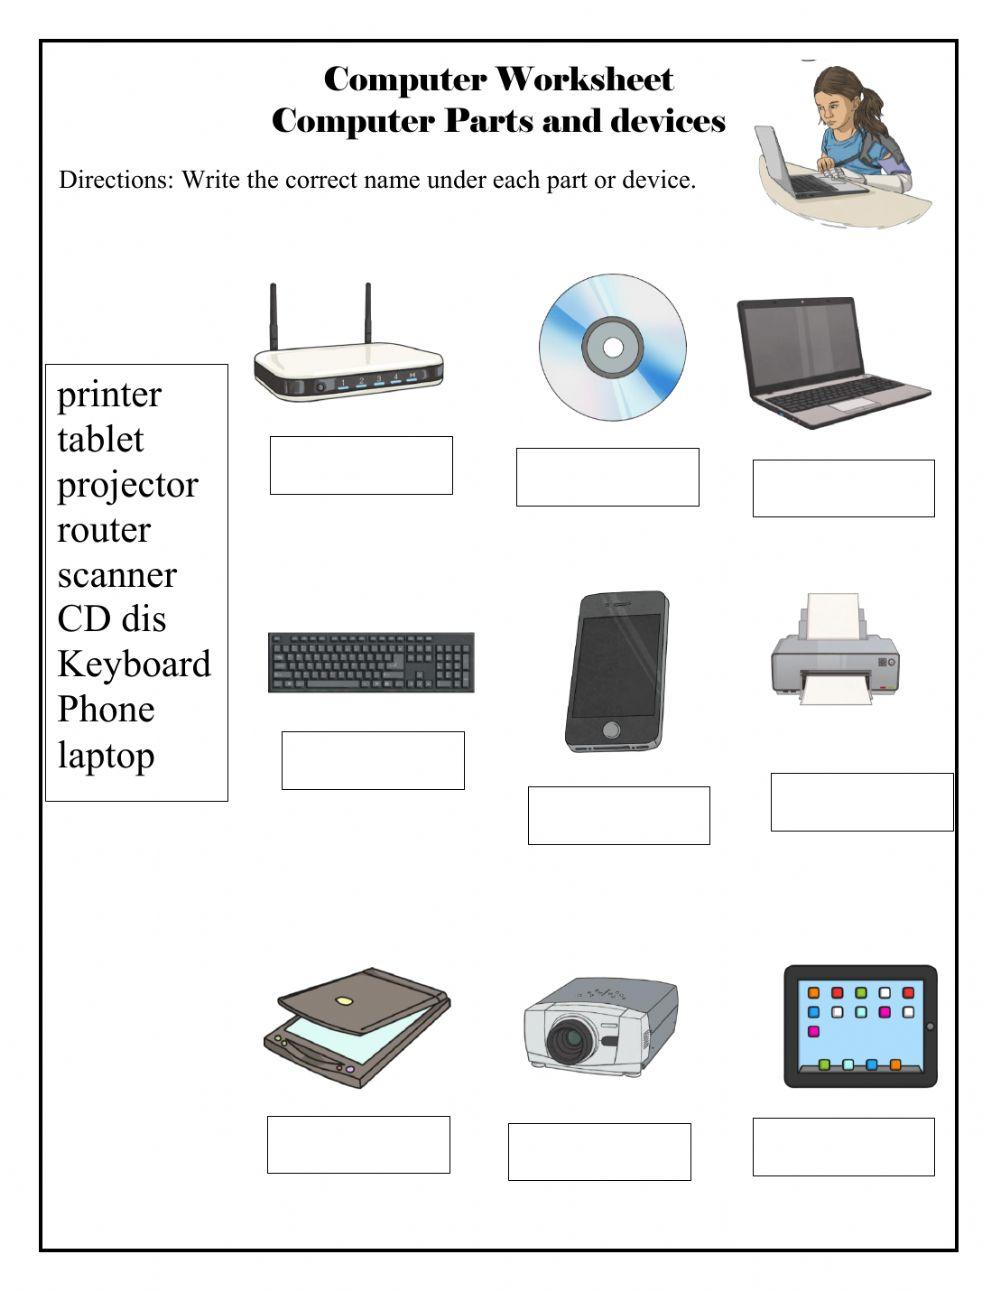 Computer parts and devices